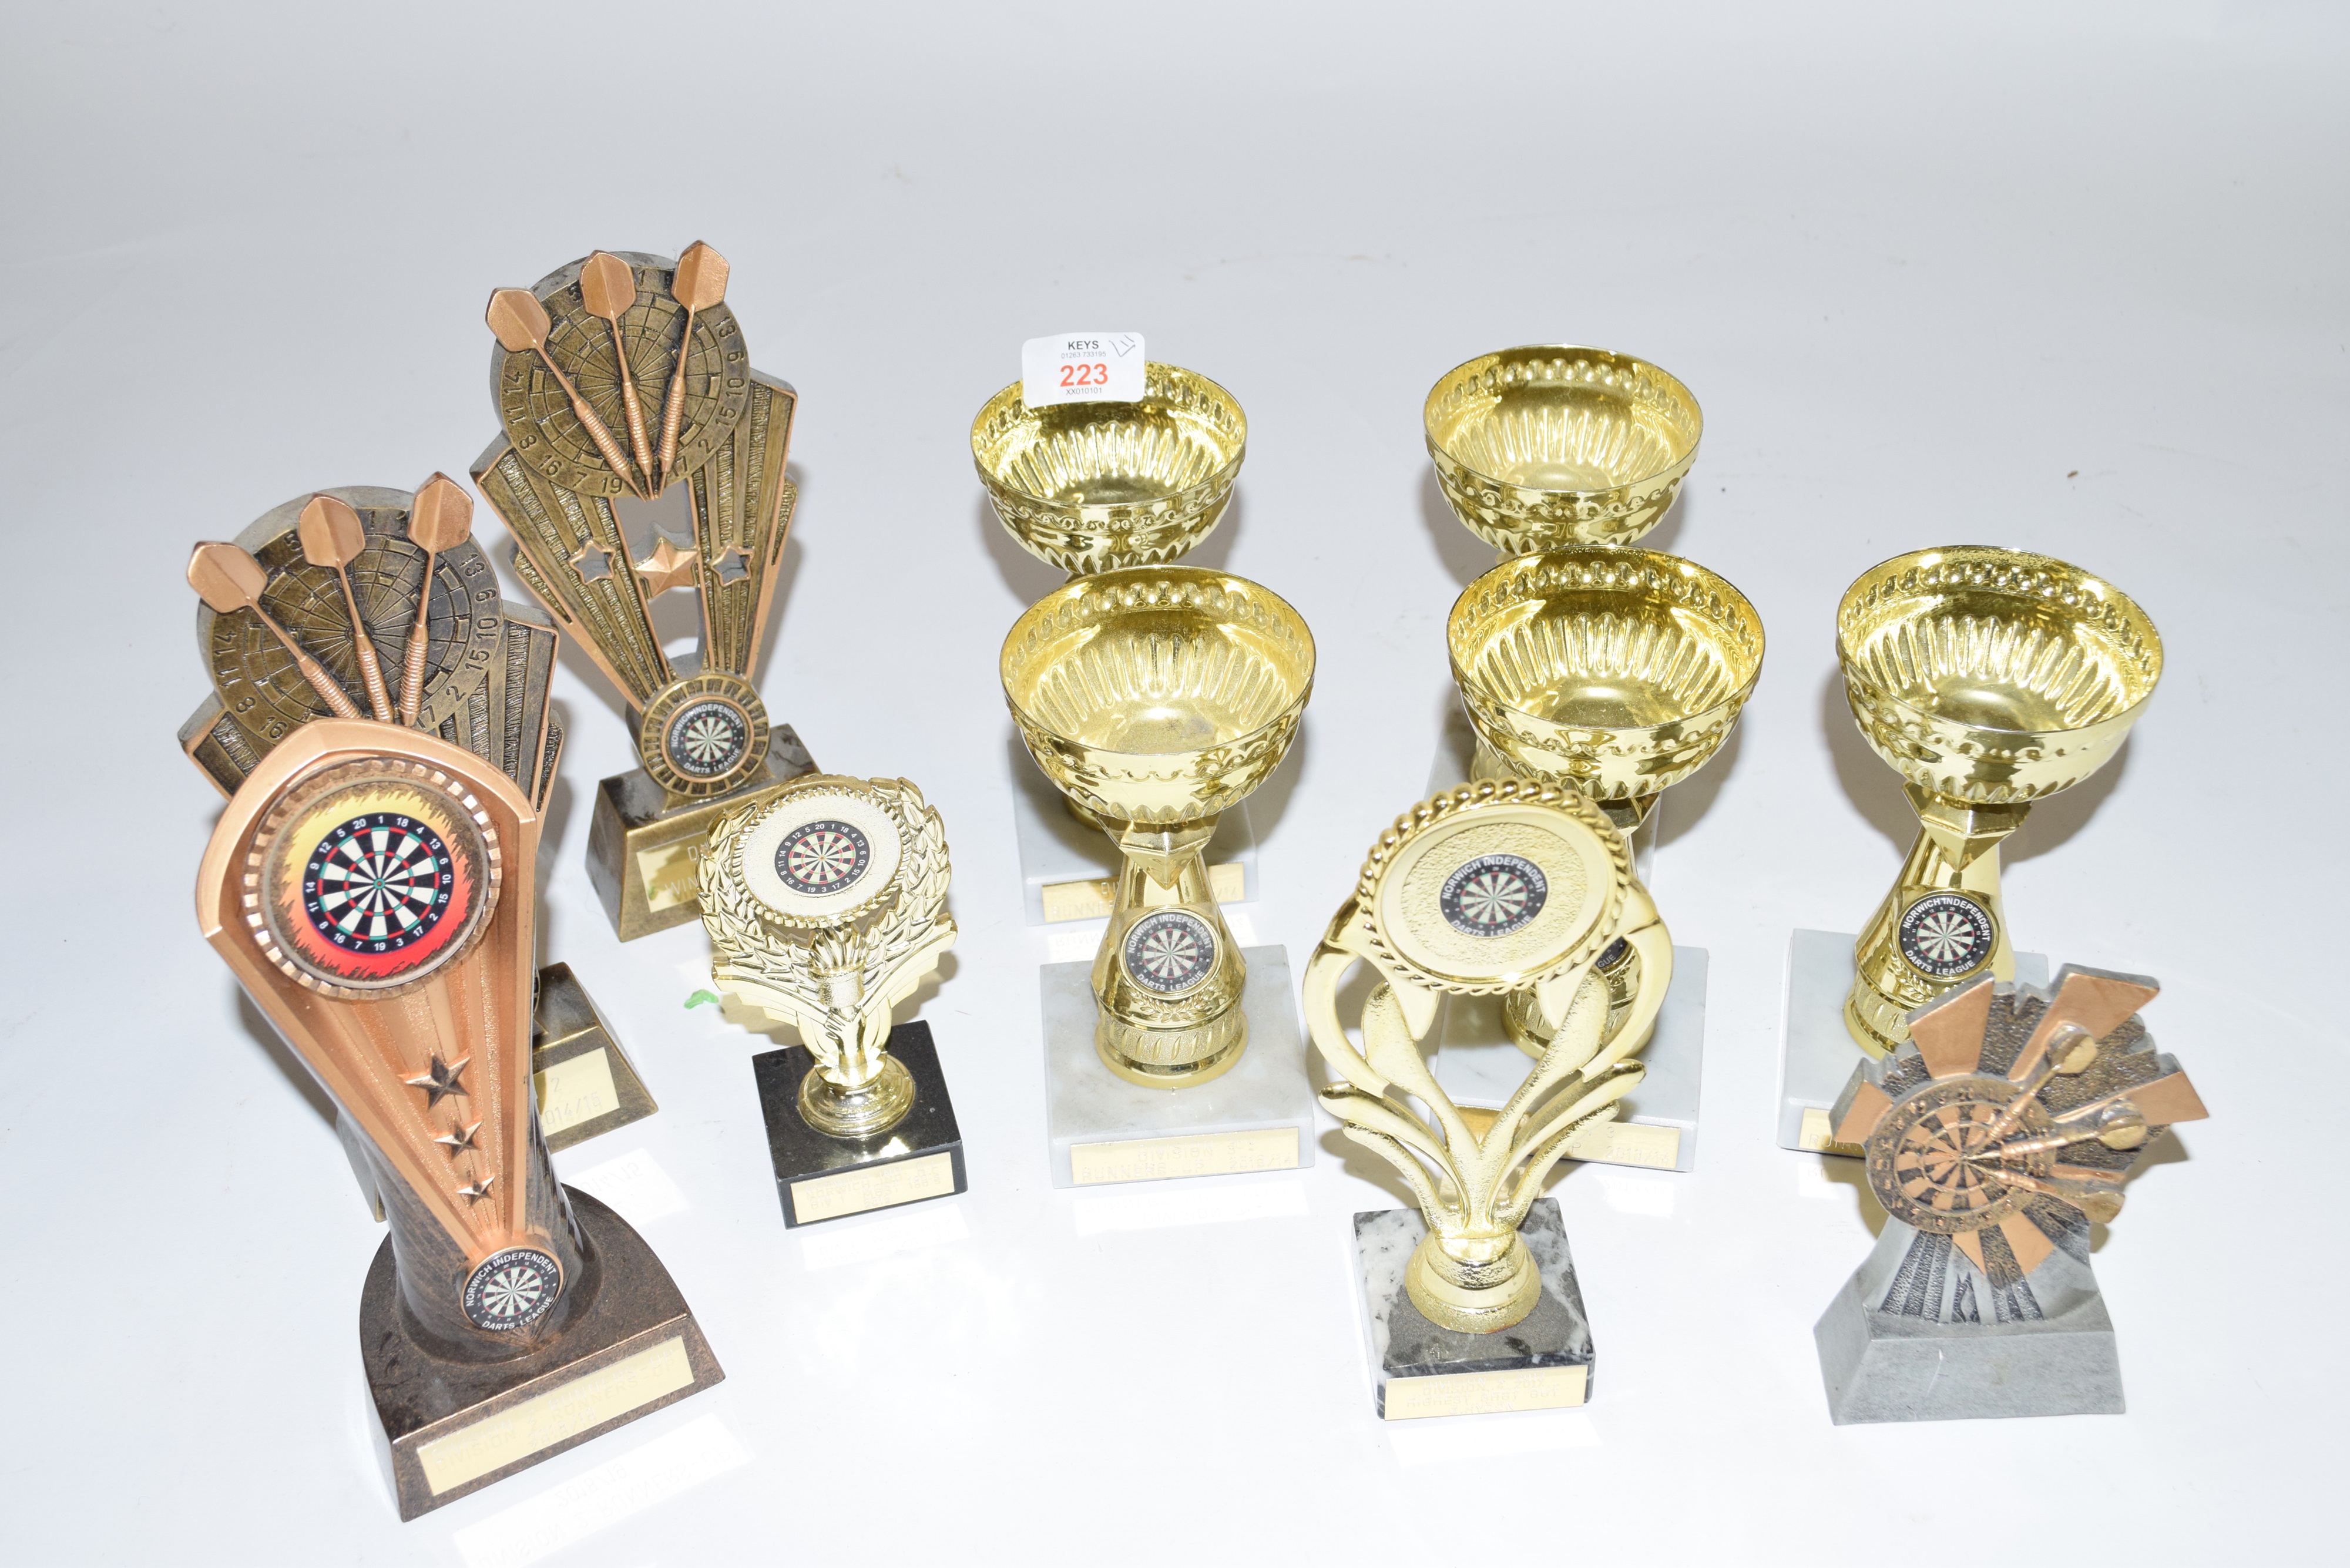 Group of eleven various small darts trophies, plastic/composition construction